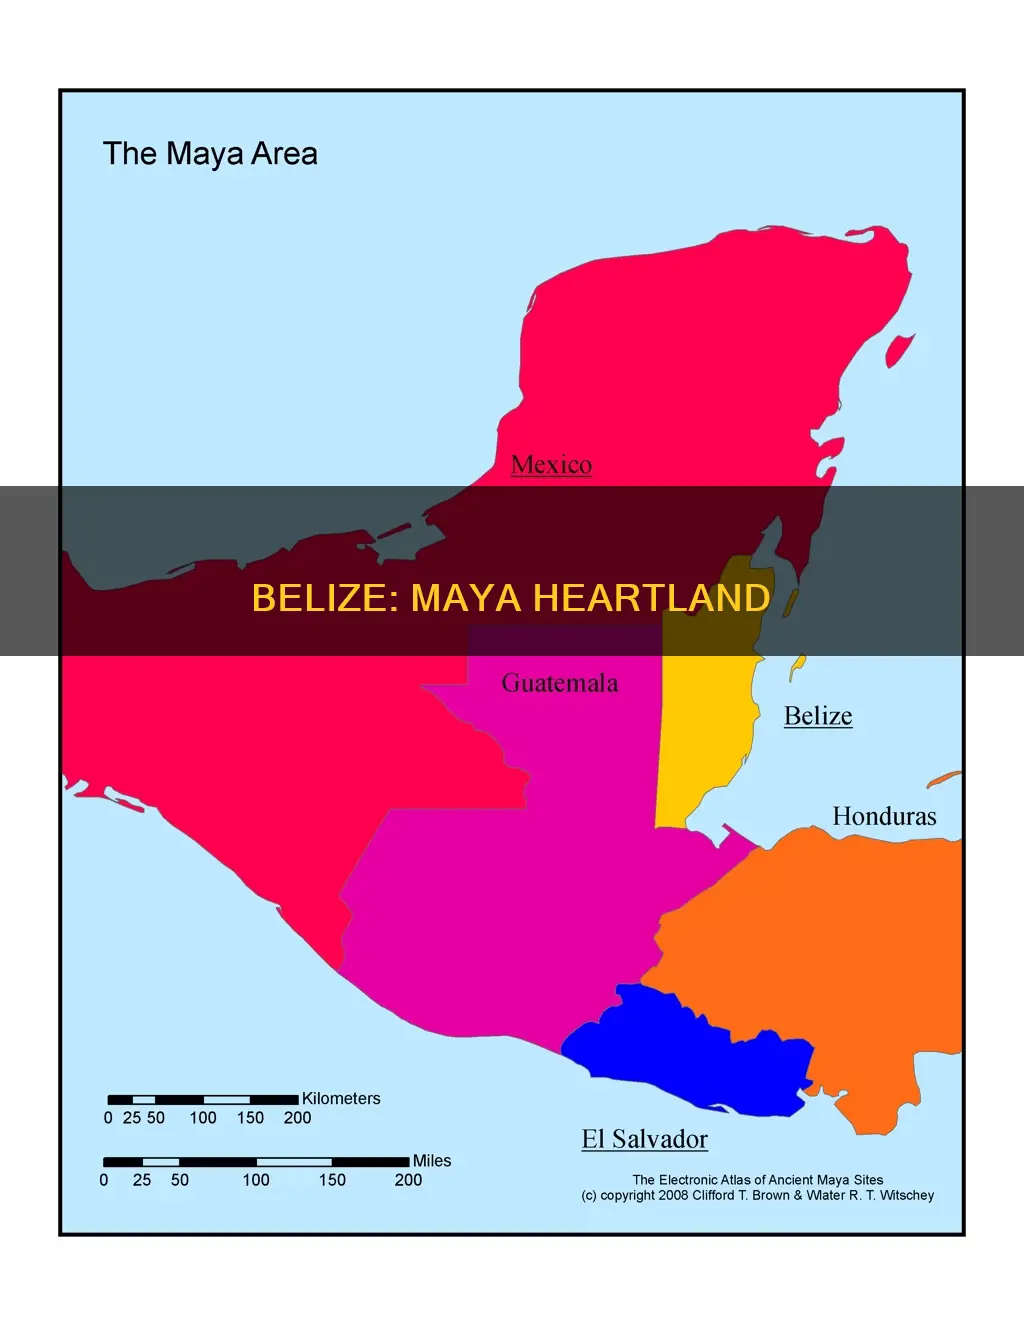 what part of maya area is belize